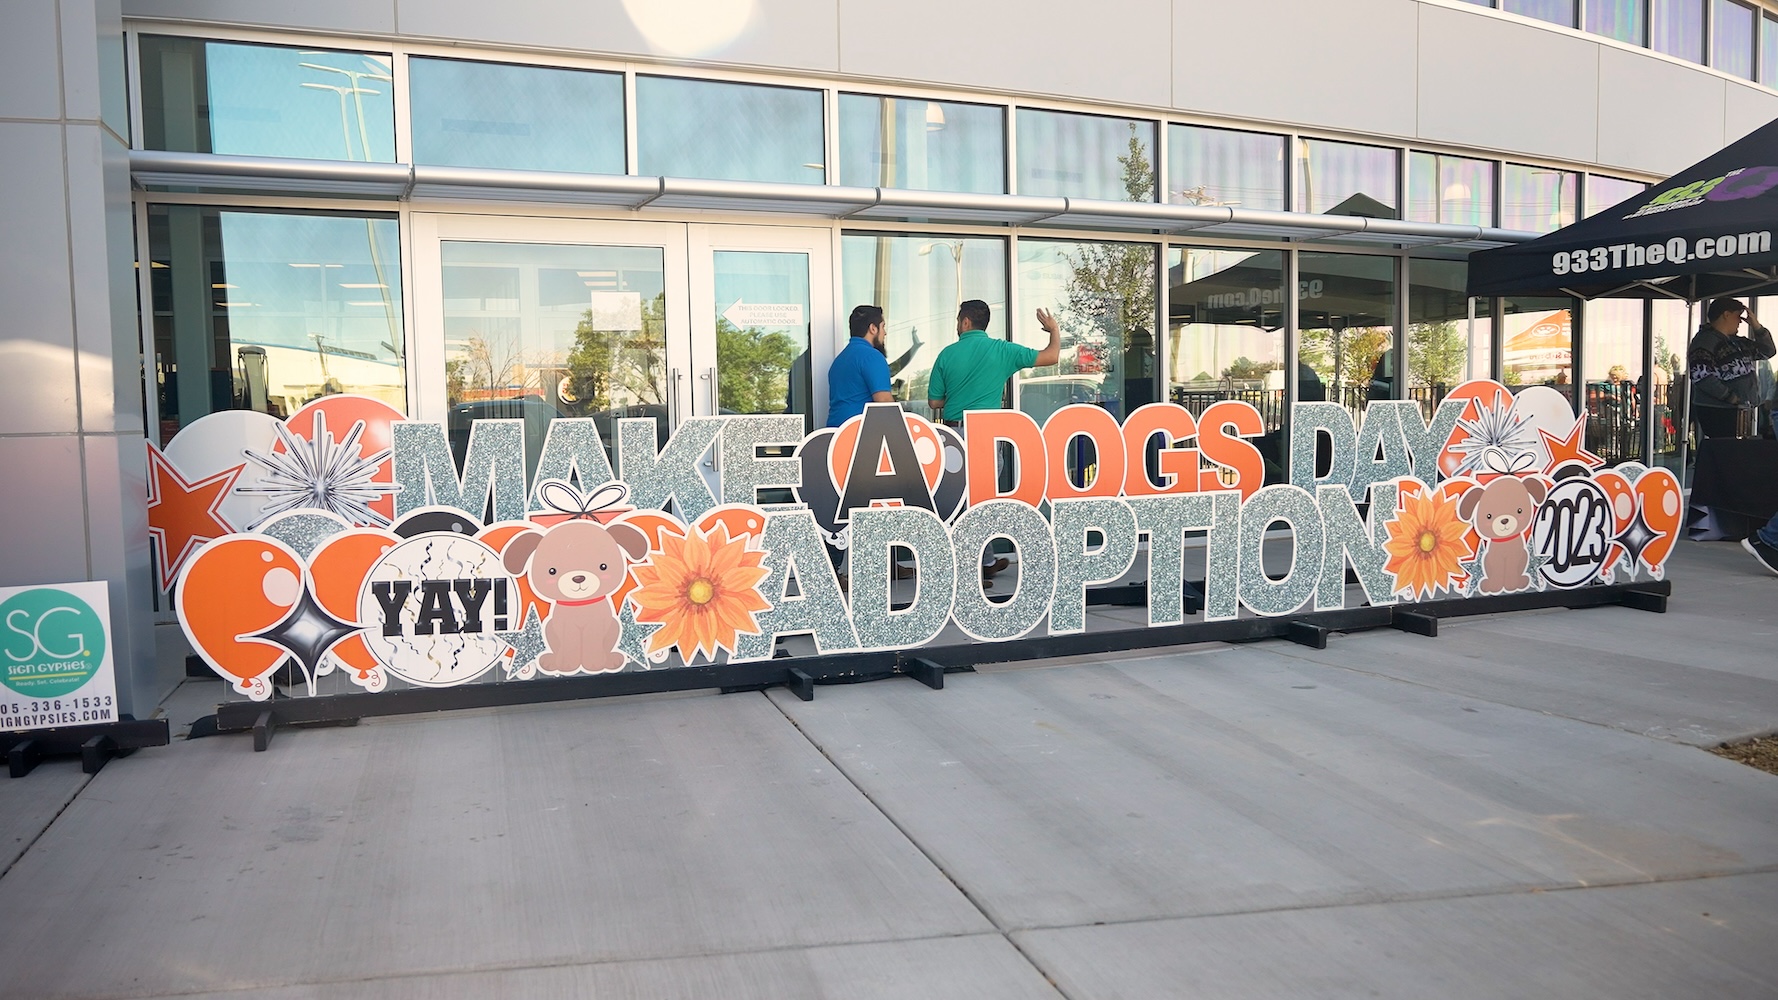 Sign - make a dogs day with pet adoption